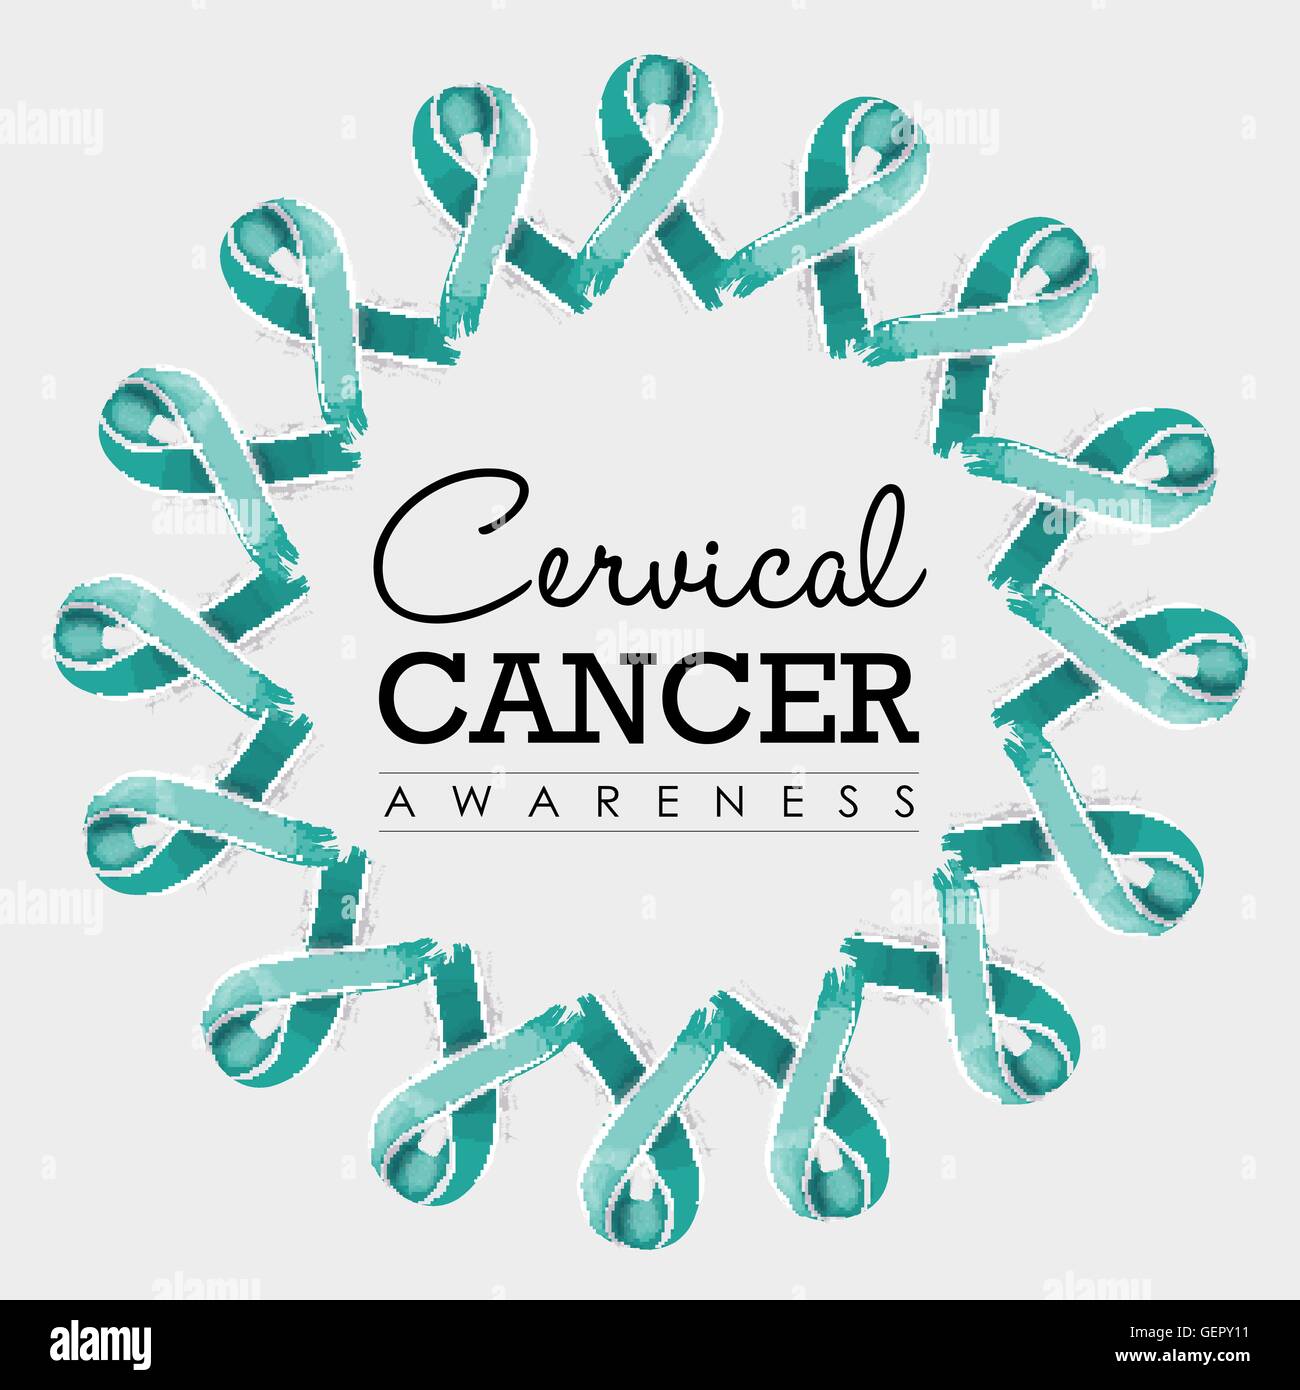 Cervical cancer awareness typography design with mandala made of blue teal hand drawn ribbons. EPS10 vector. Stock Vector